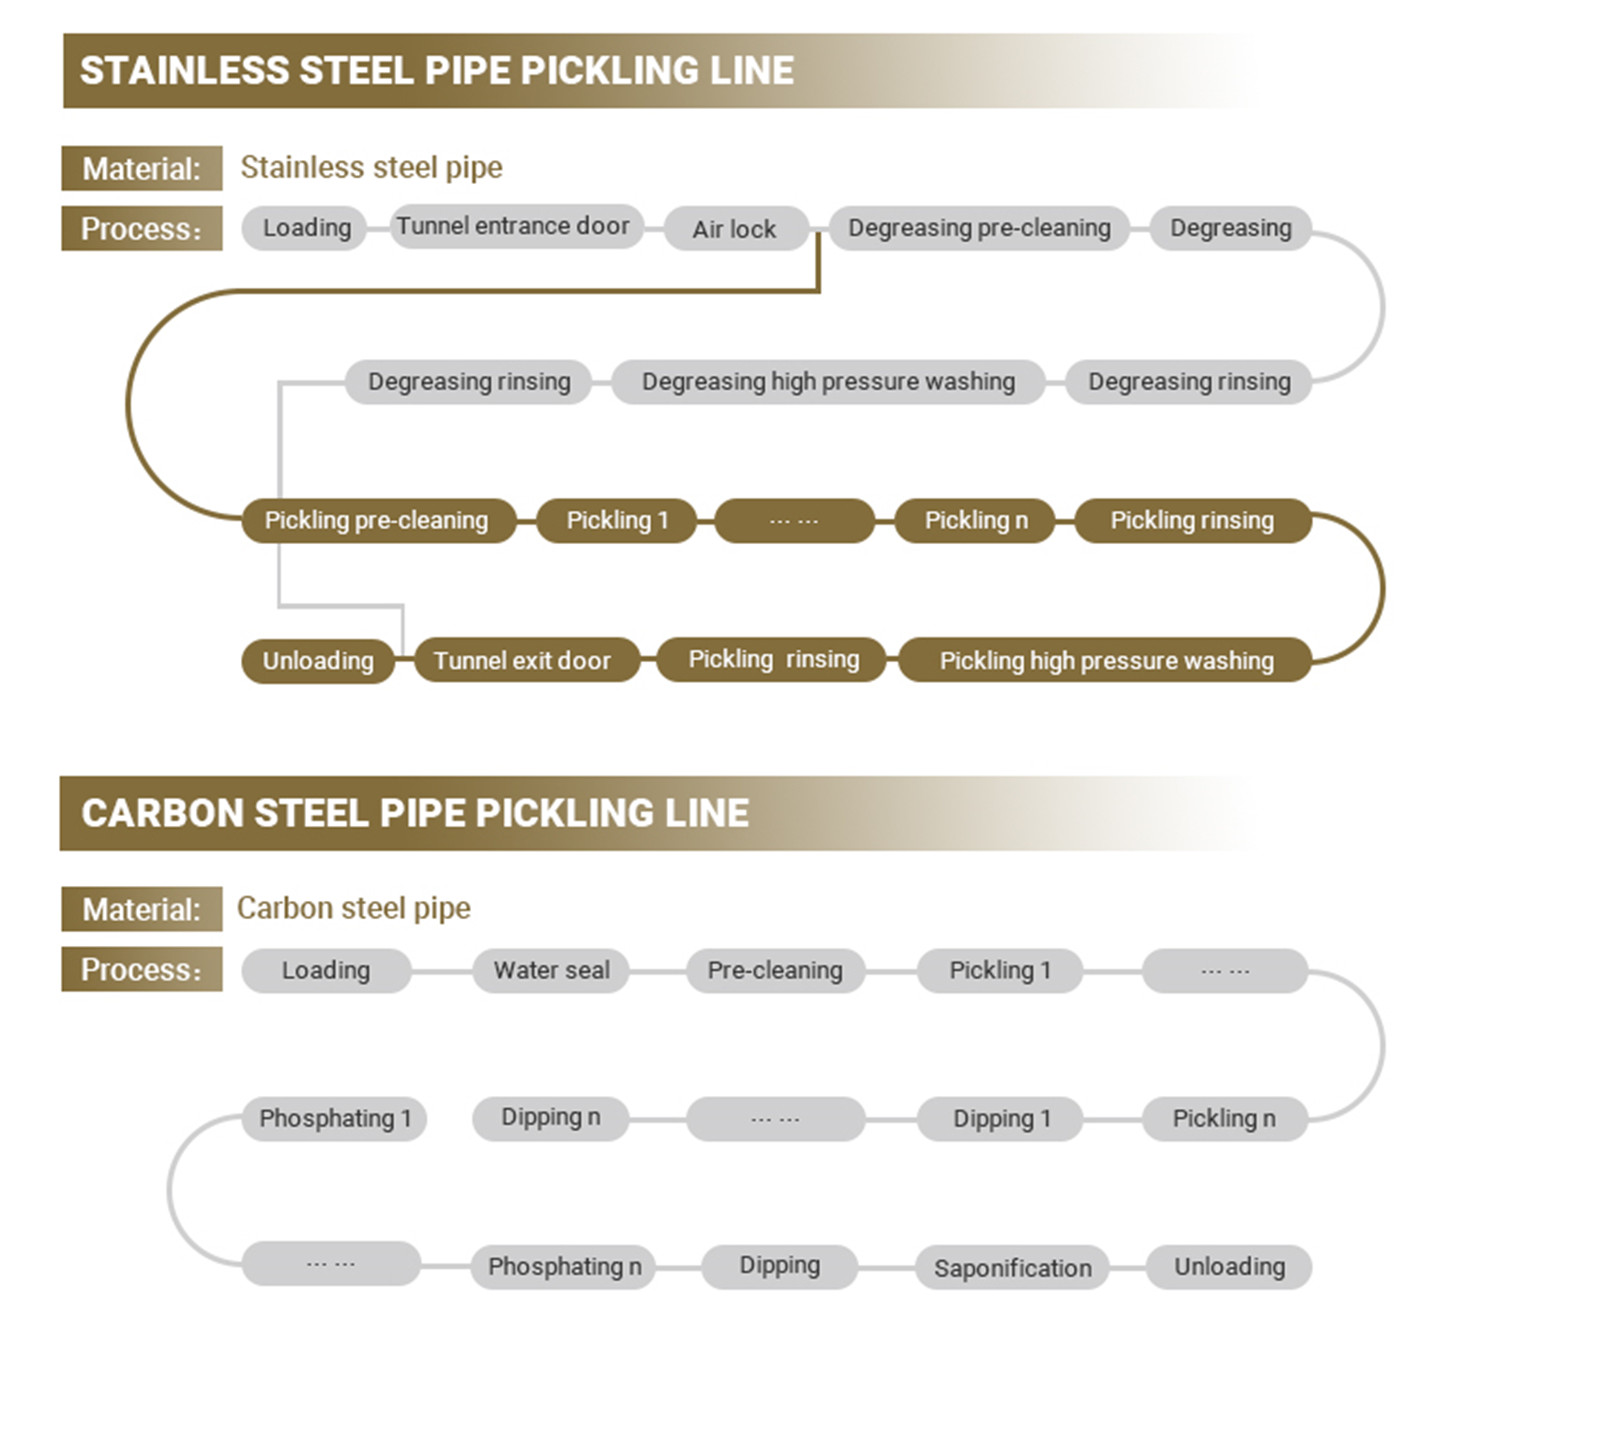 Stainless steel pipe pickling line